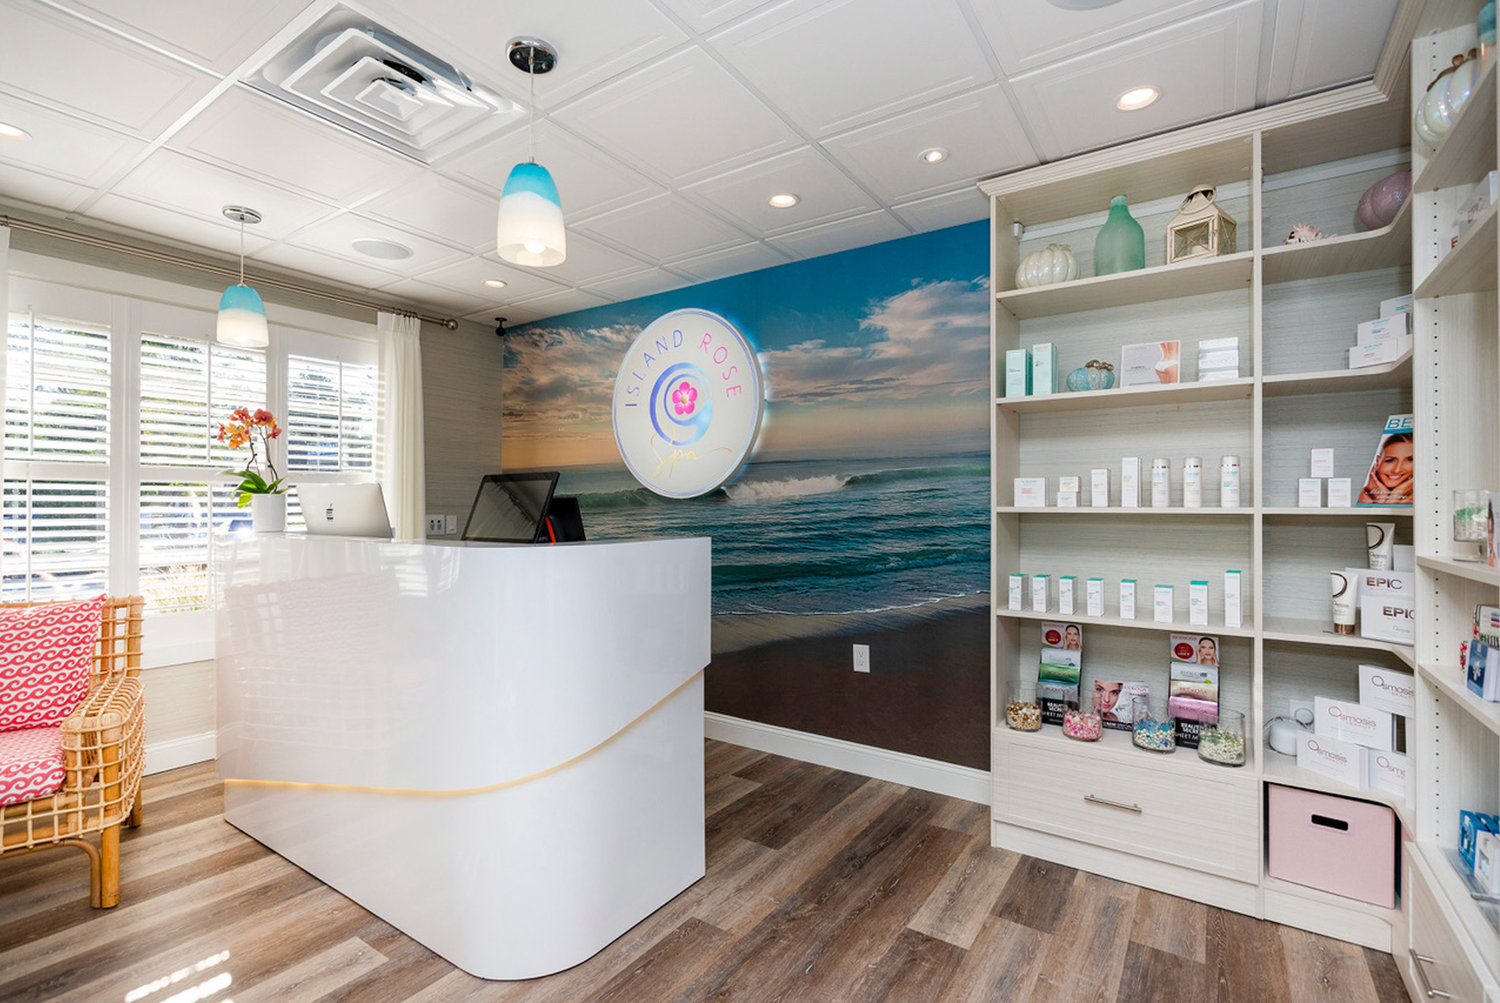 Tanquility begins at the reception area of Island Rose Spa